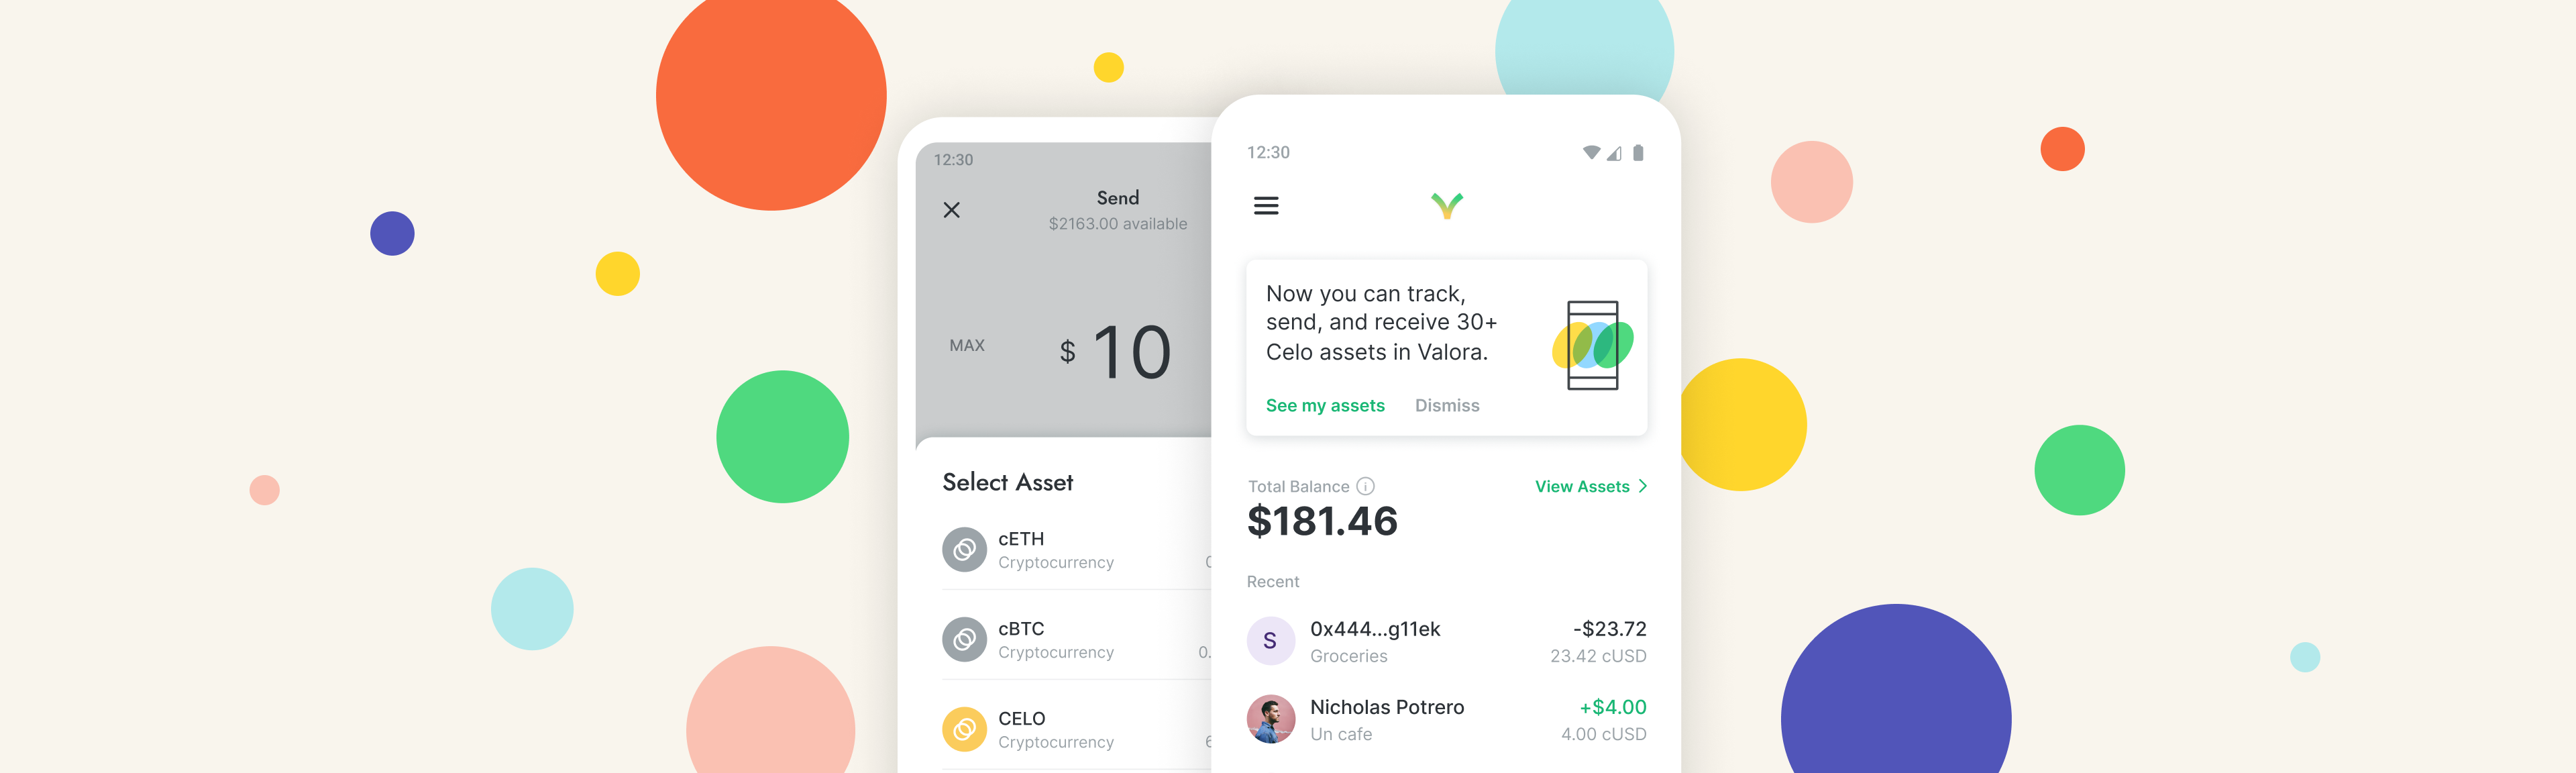 30+ tokens available on Valora with image of phone in the asset screen